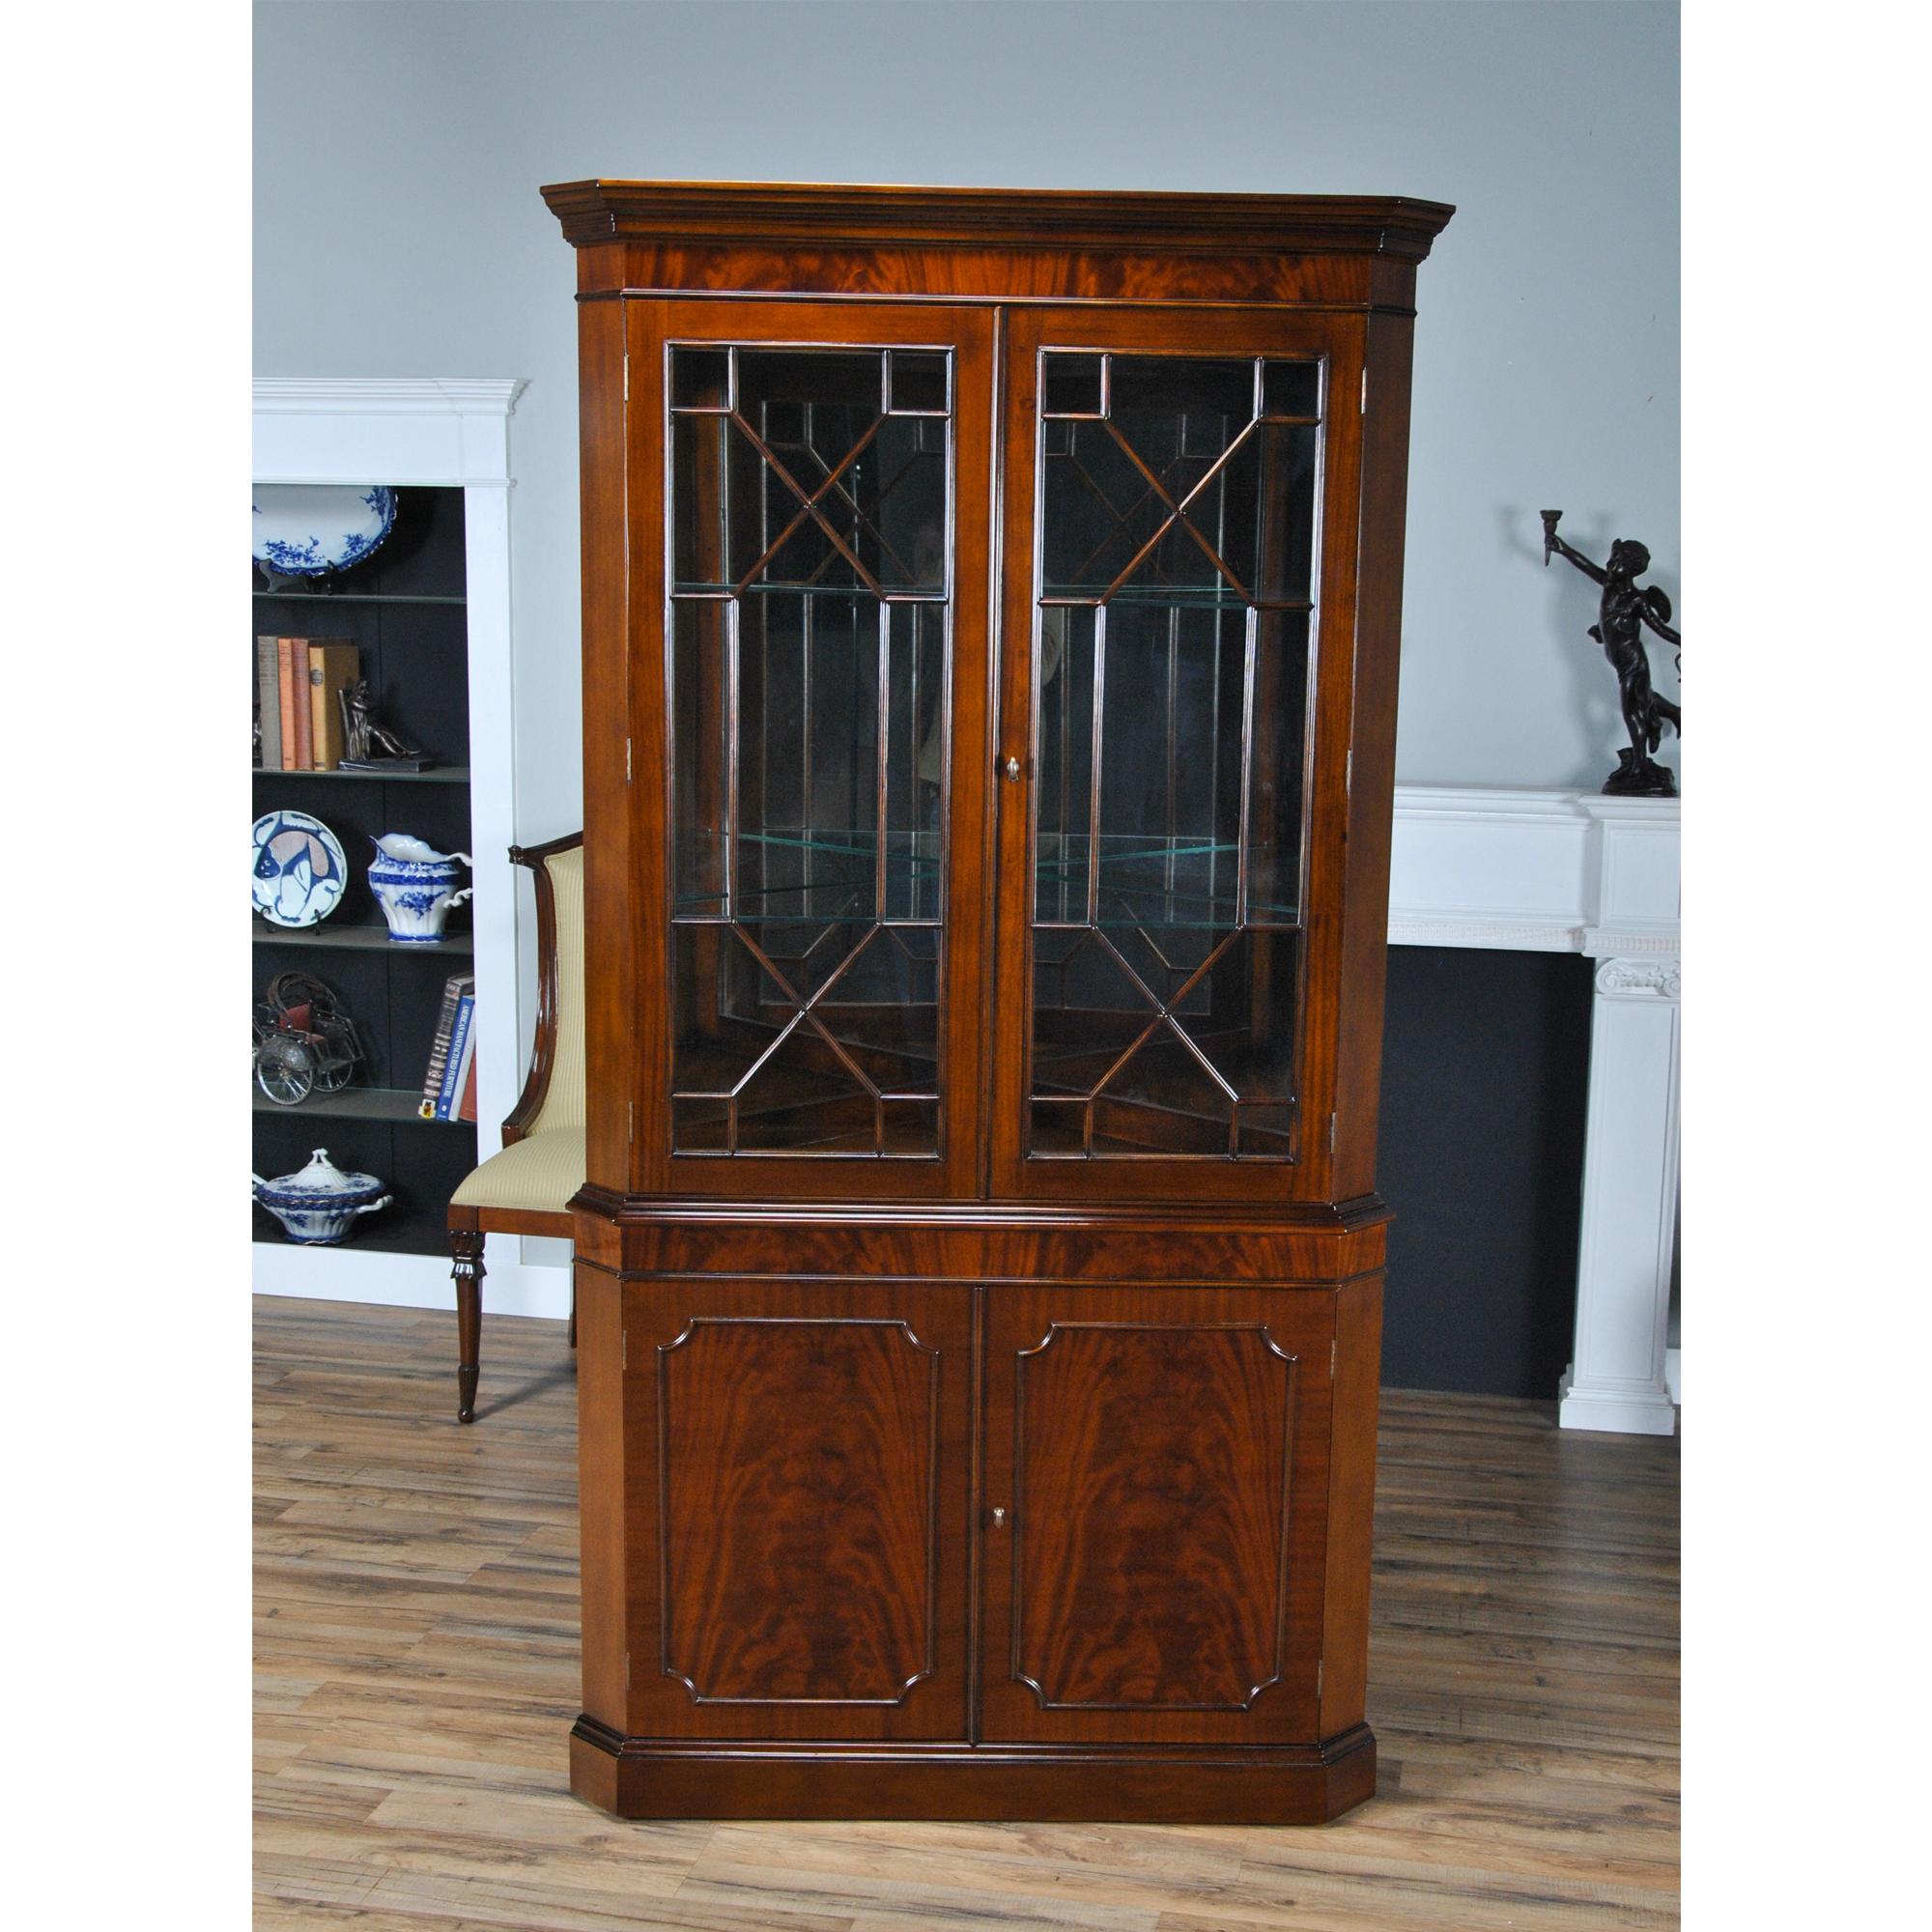 This double door, Large Mahogany Corner Closet is manufactured from kiln dried, plantation grown, mahogany, and features figured mahogany veneers on the door fronts. The attention to detail and expert craftsmanship is apparent in the hand carved